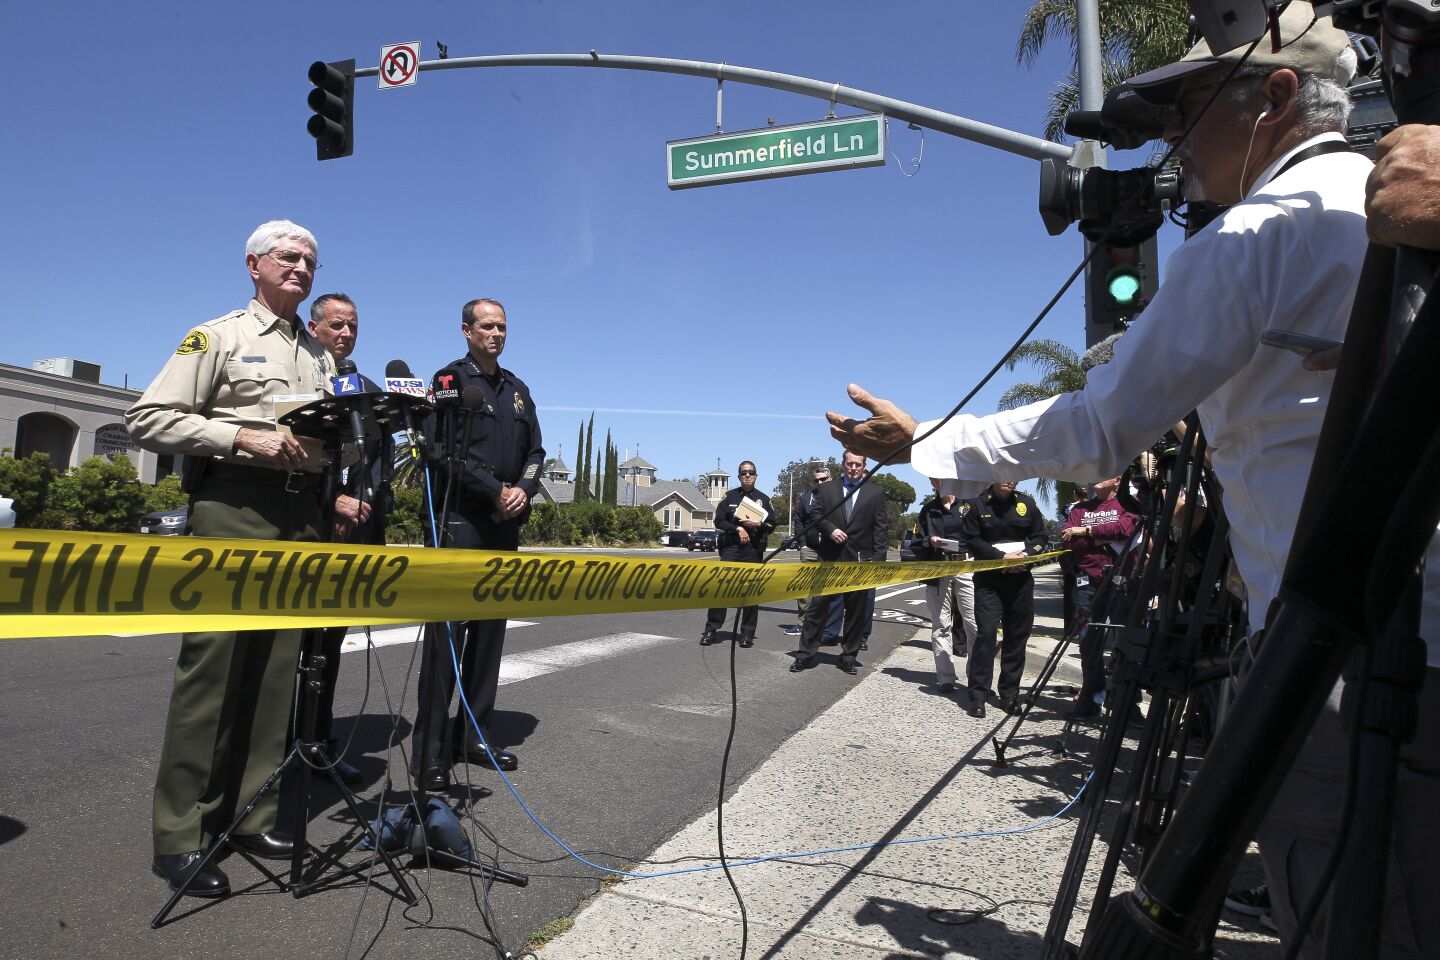 With the Chabad of Poway synagogue behind them, where a man with a gun shot multiple people inside the synagogue, killing one, San Diego Sheriff Bill Gore takes questions about the shooting from the media on Saturday, April 27, 2019 in Poway, California.